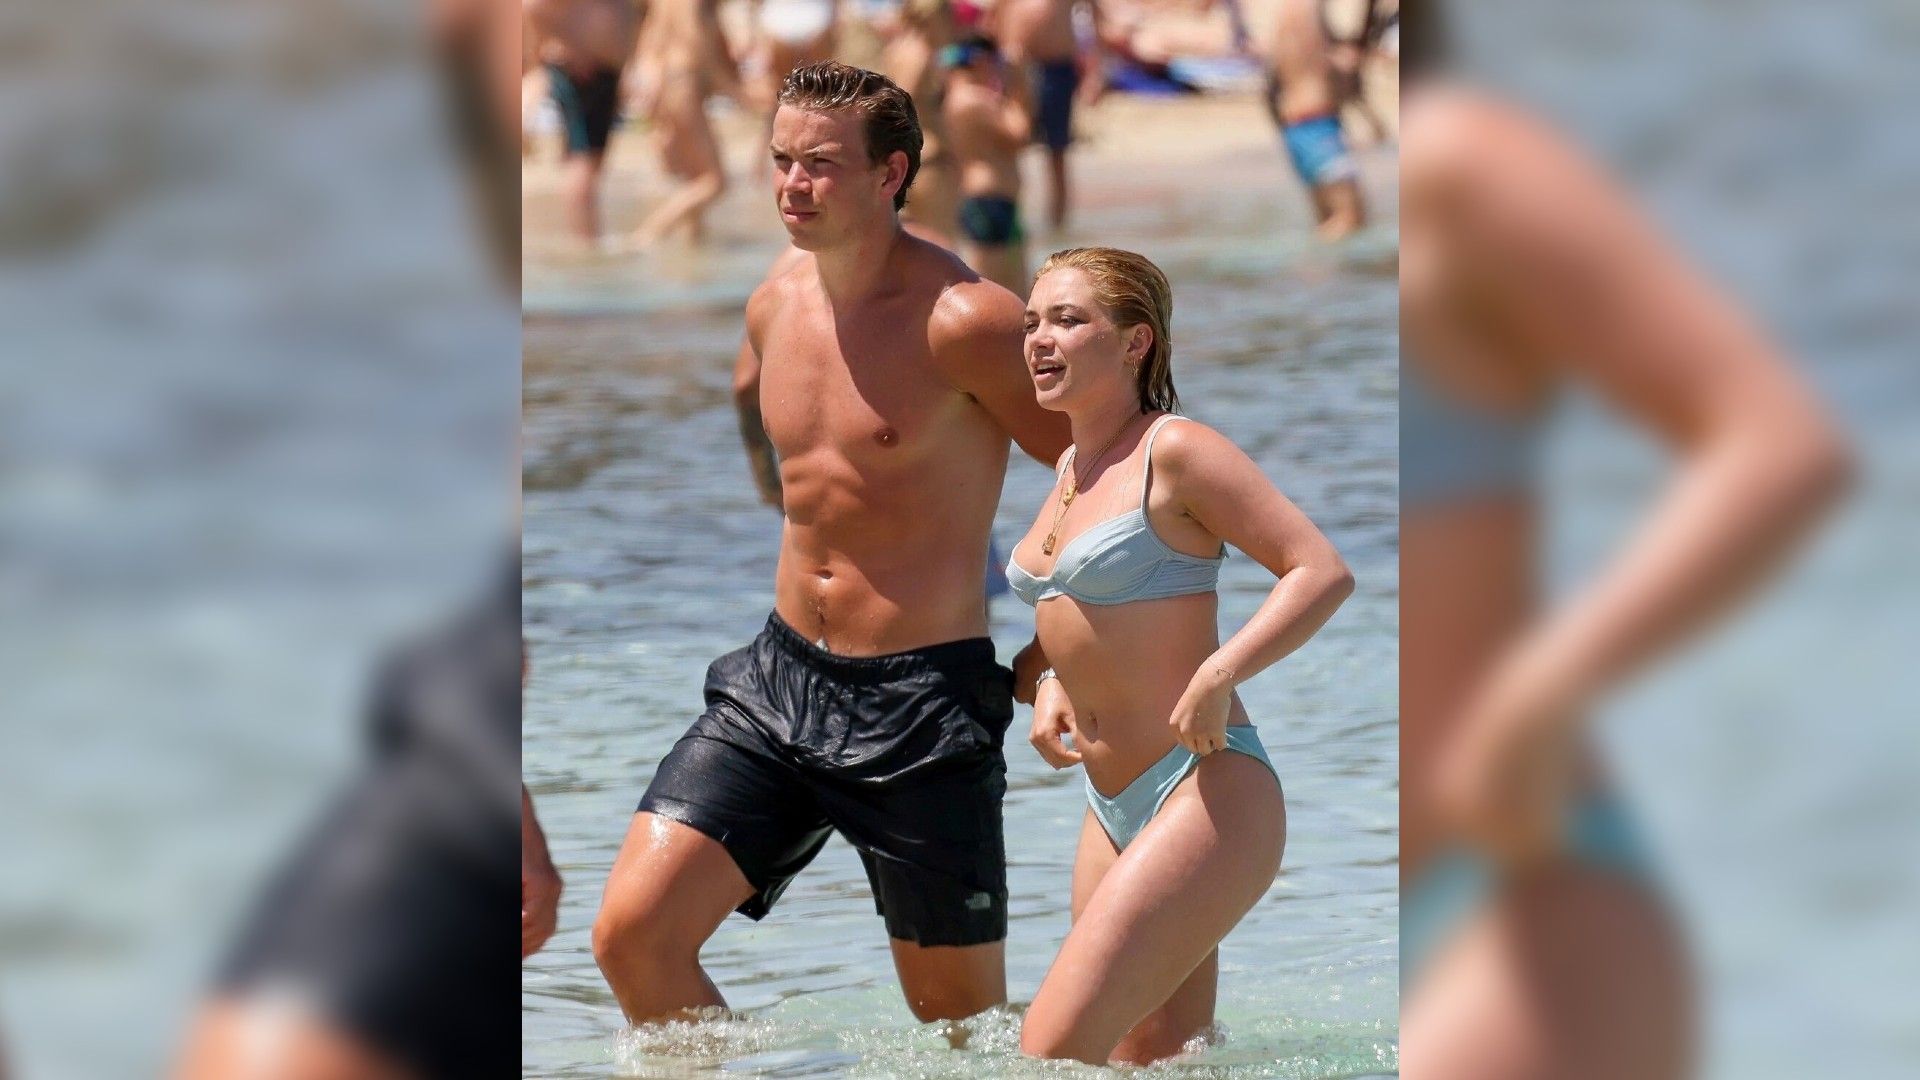 Will Poulter and Florence Pugh on vacation